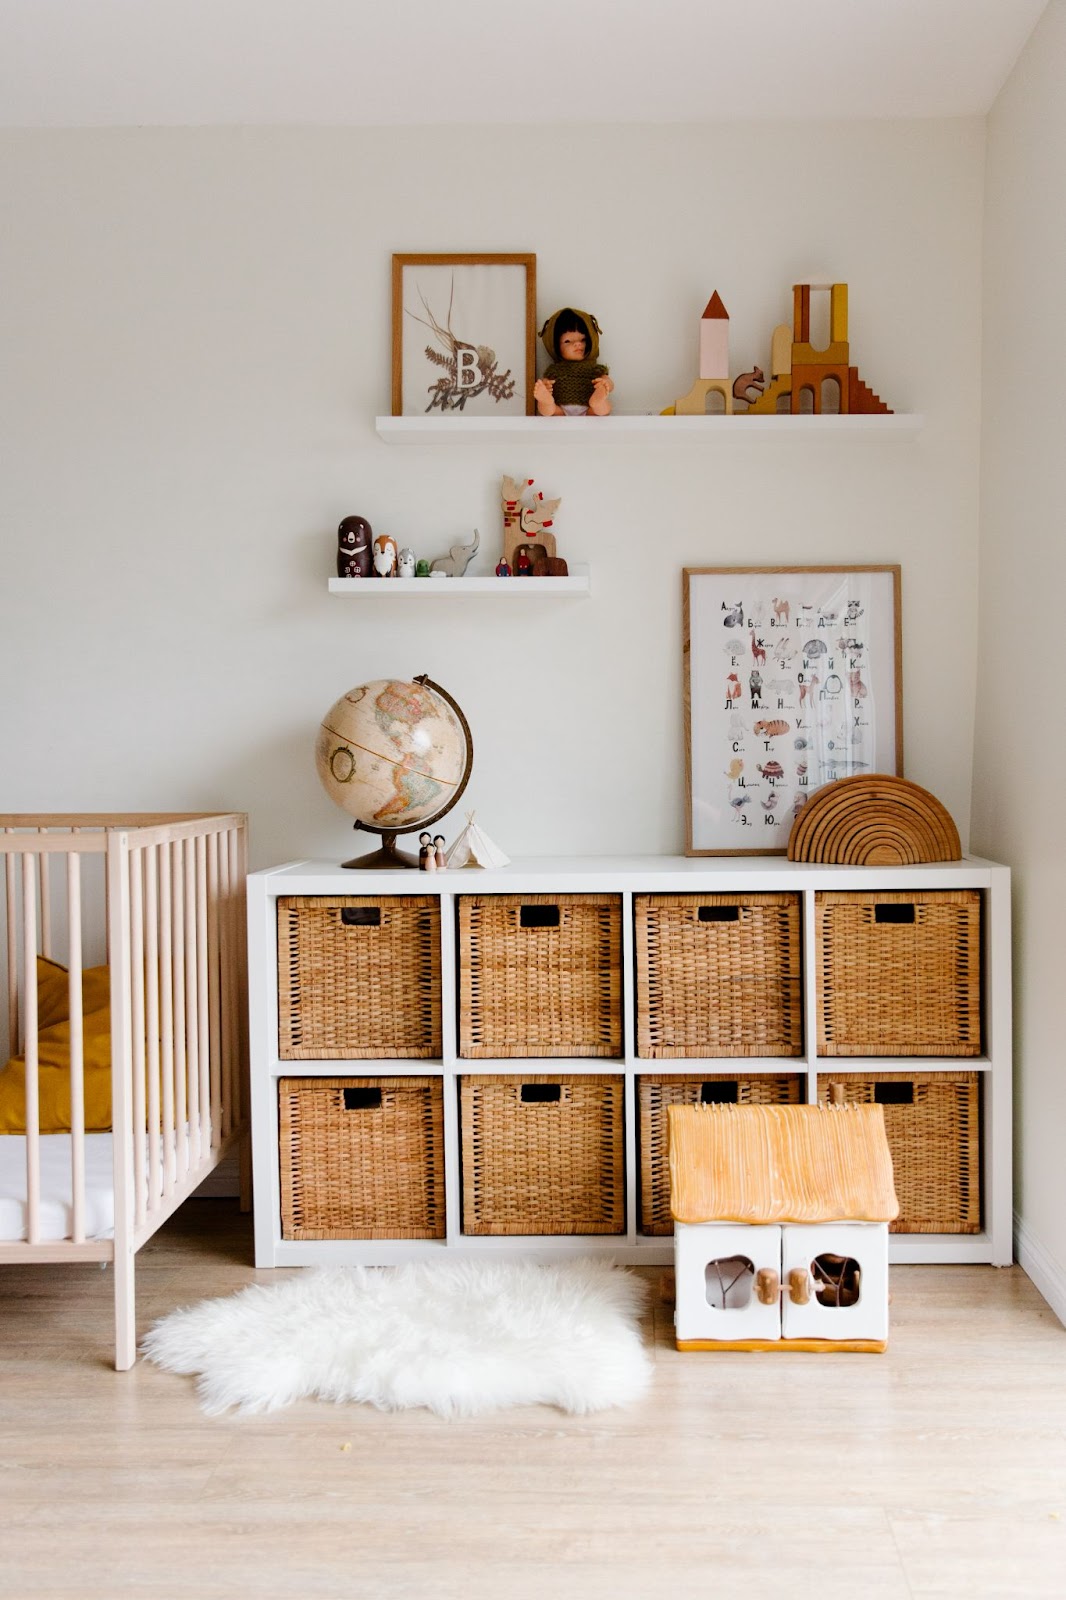 Toy storage -Toddler bedroom ideas featured image - Baby Journey